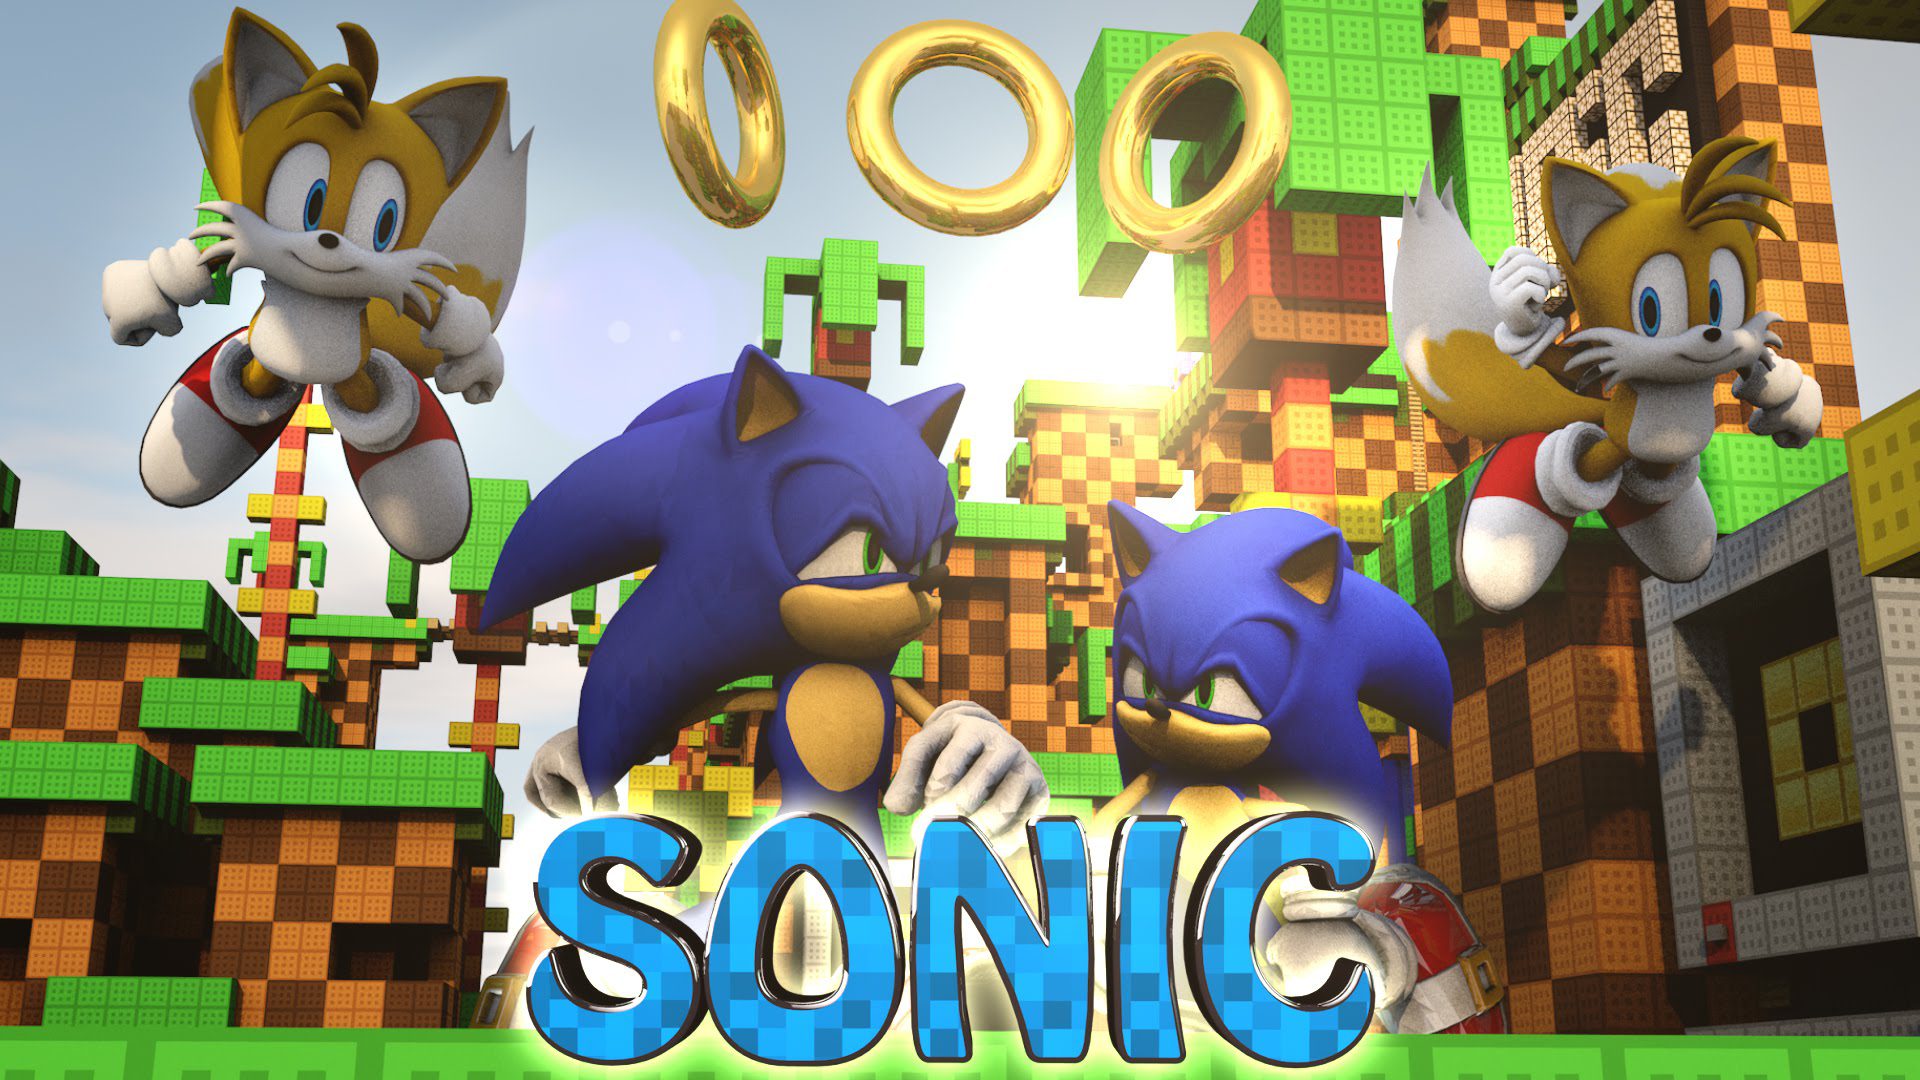 SONIC THE HEDGEHOG MOVIE IN MINECRAFT 10! Season 1 (official